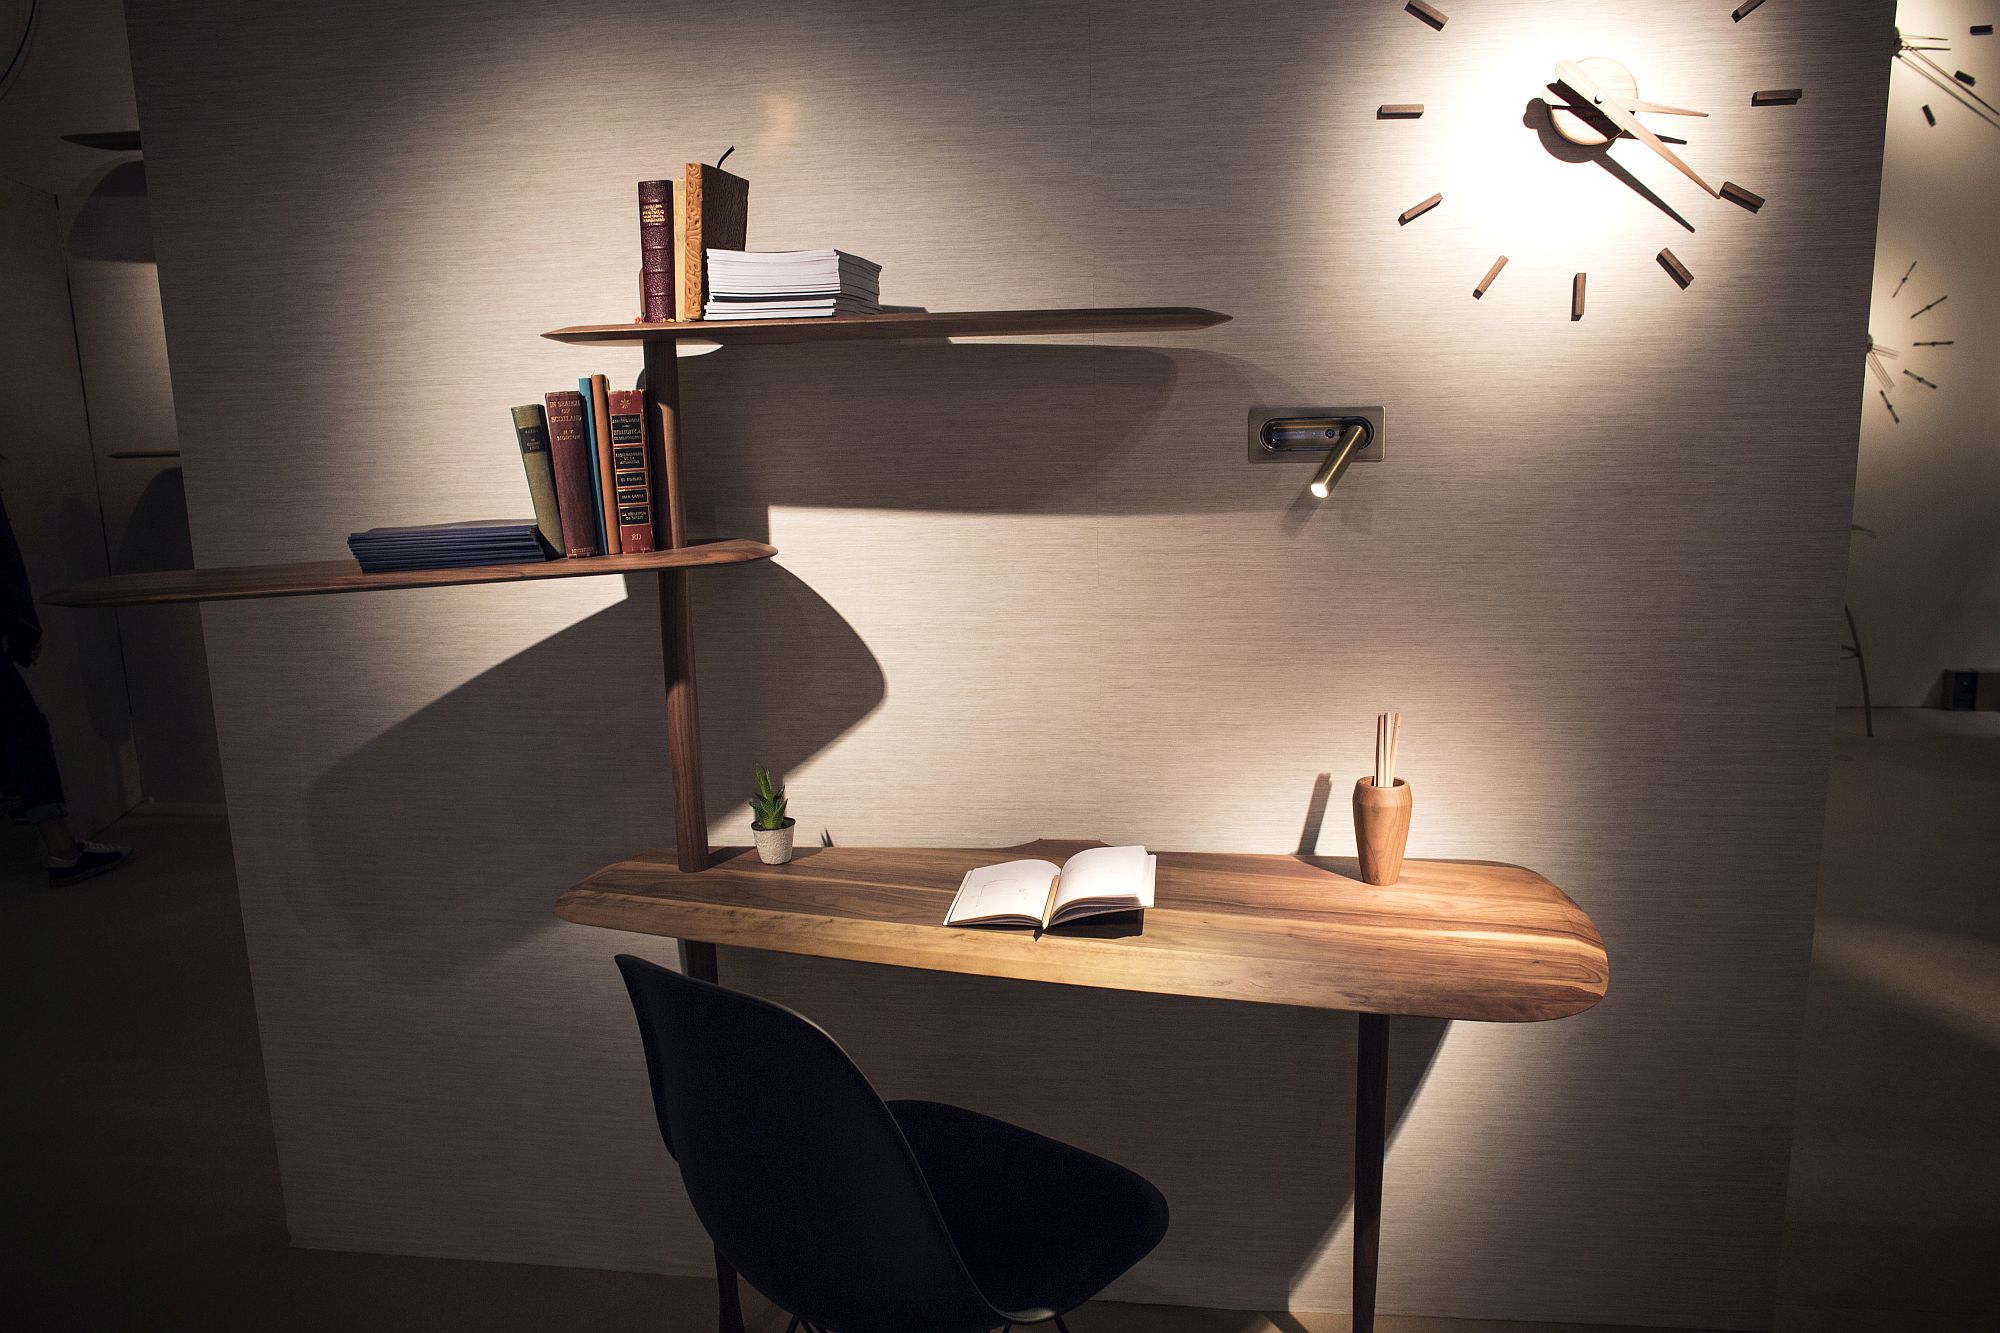 Creating-shelves-above-the-sleek-workdesk-beat-the-plain-old-shelves-any-day